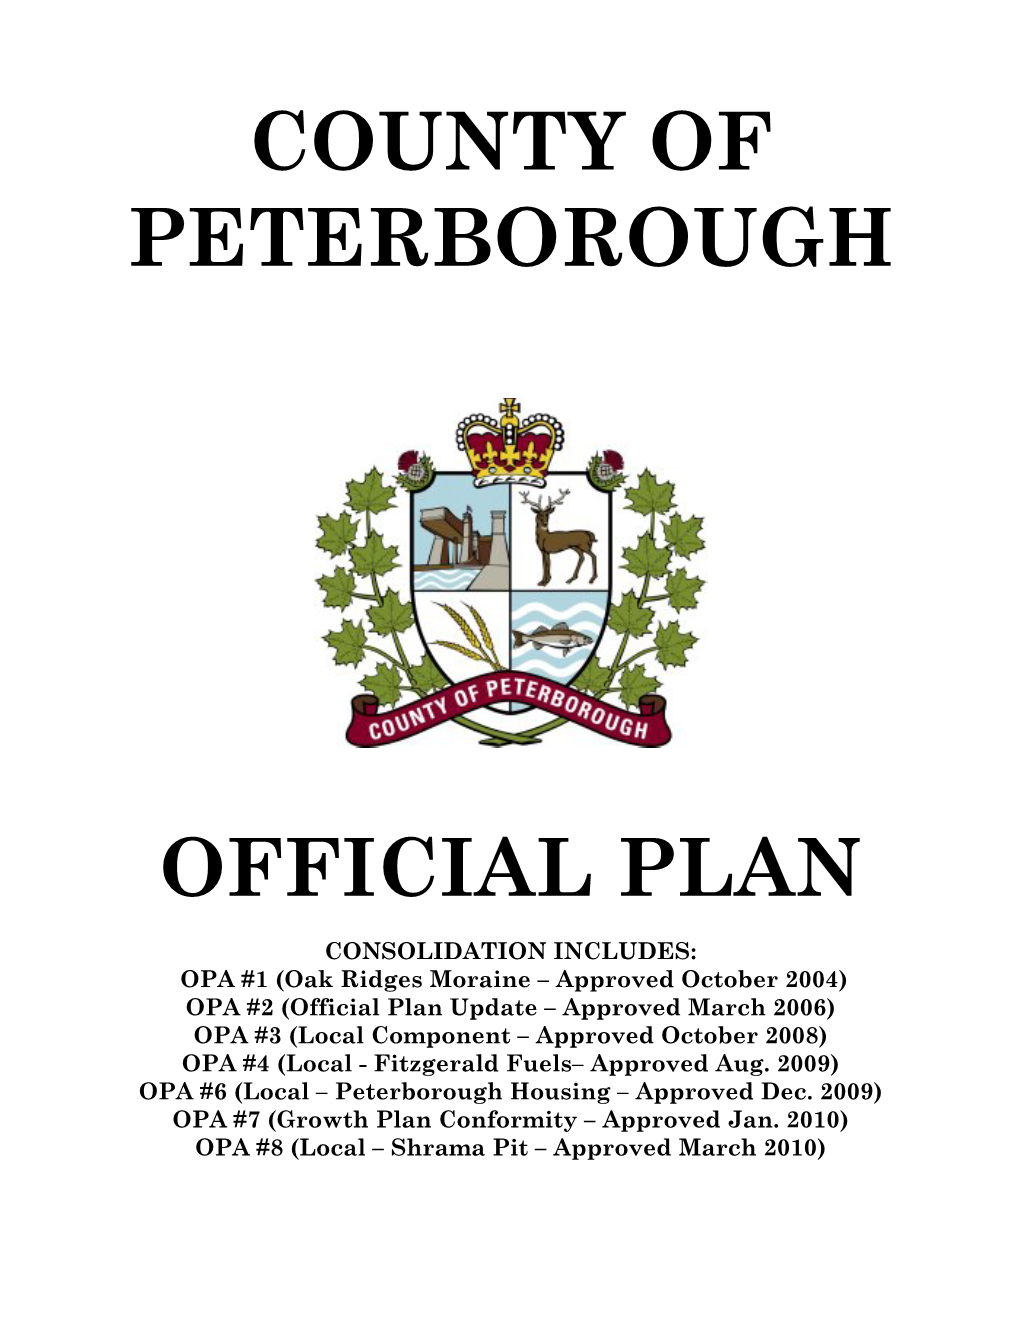 County of Peterborough Official Plan Has Two Functions